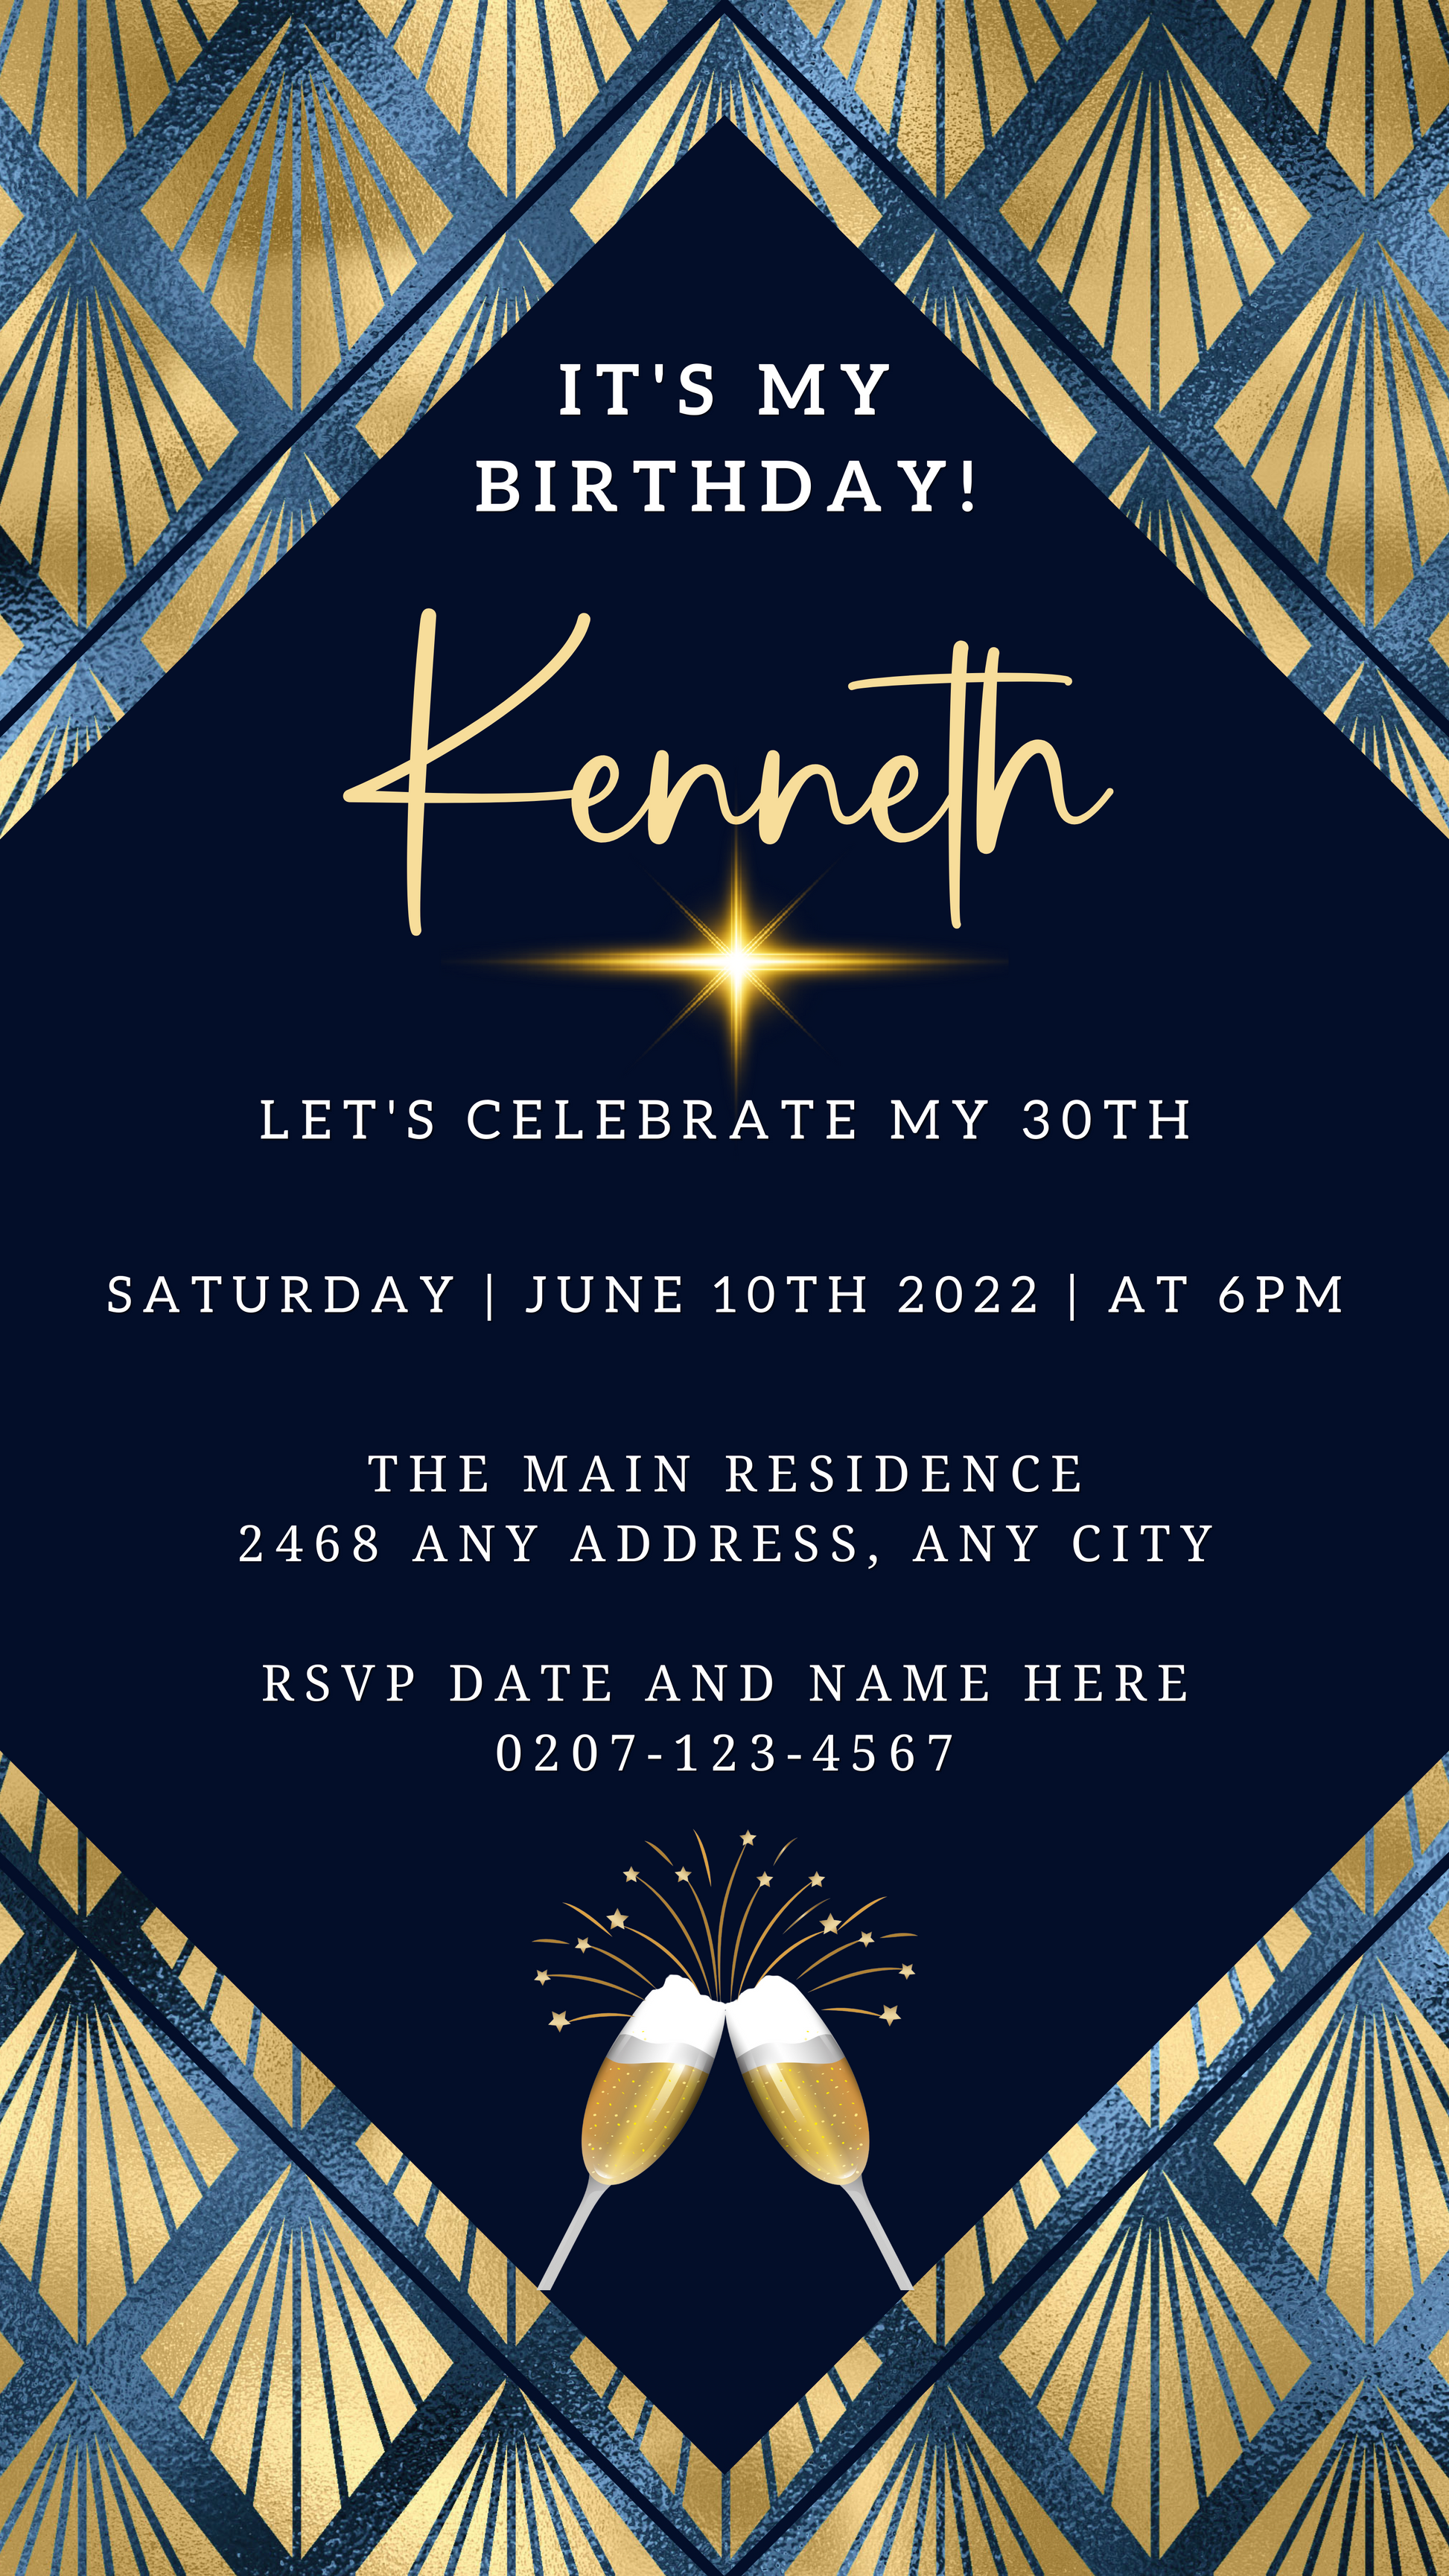 Gold Blue Diamond Art Birthday Party Evite featuring editable text and art deco design, customizable via Canva for easy digital sharing.